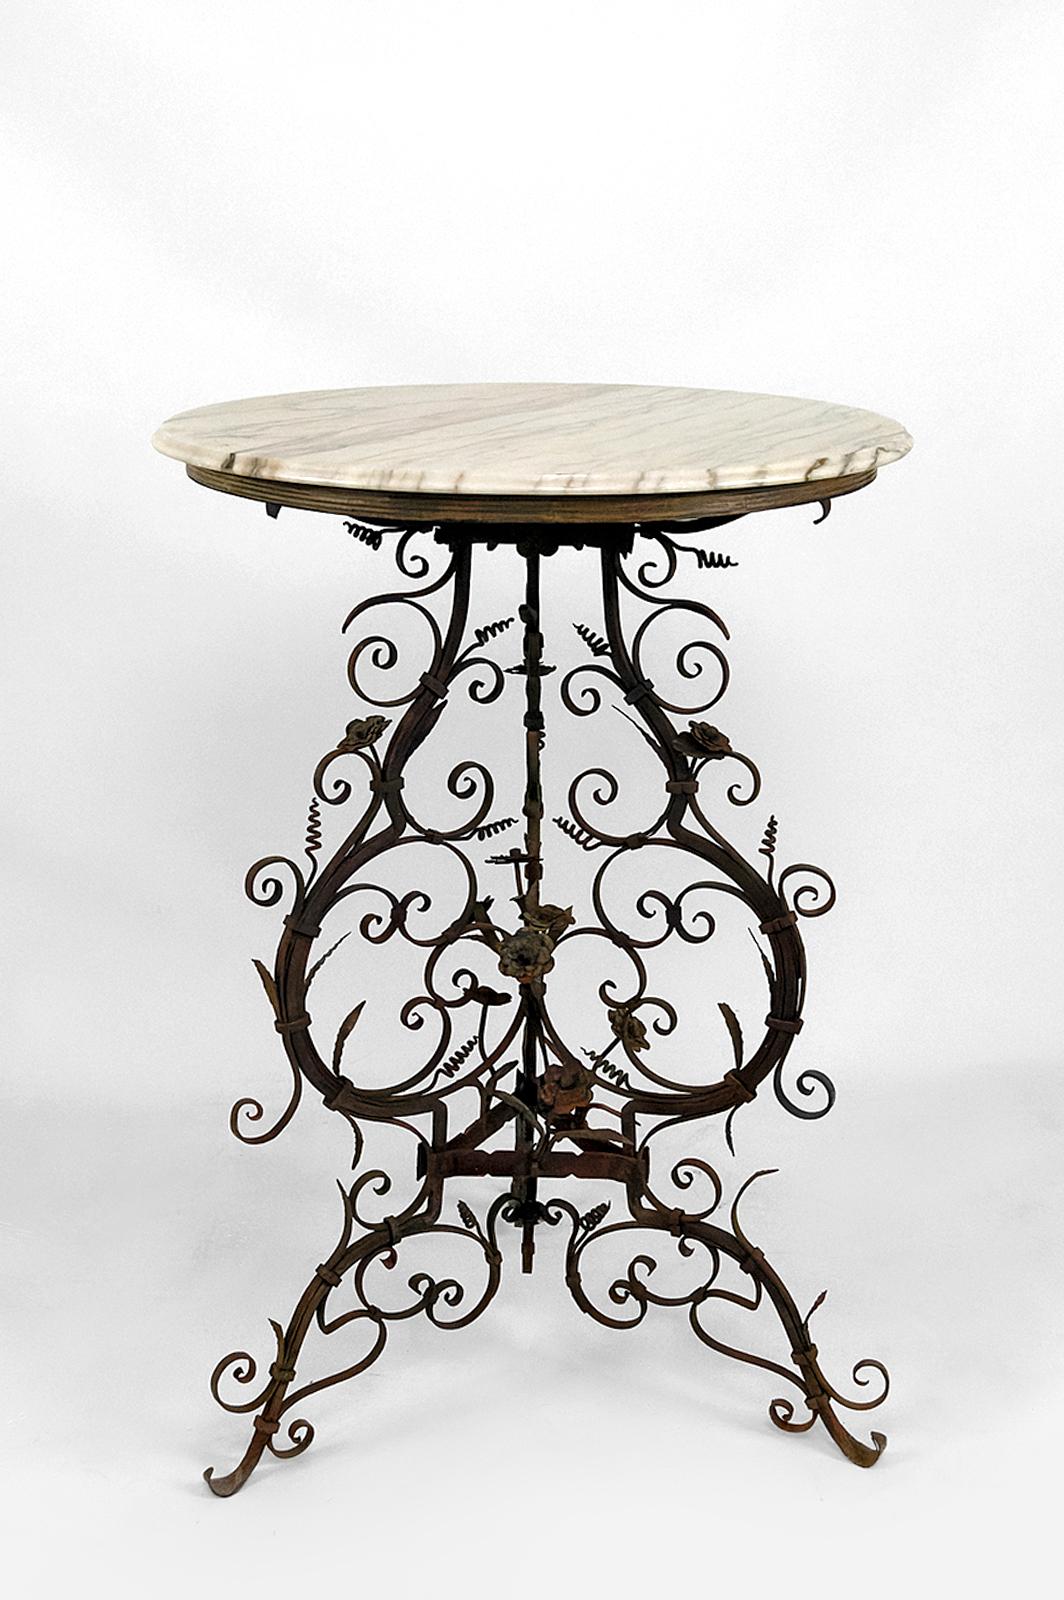 Venice, Italy, 17th-18th century

Old wrought iron tripod base of a basin or a brazier with floral decorations from the 17th or 18th century transformed into a pedestal table / gueridon / side table.

Circular marble top.

In good general condition,